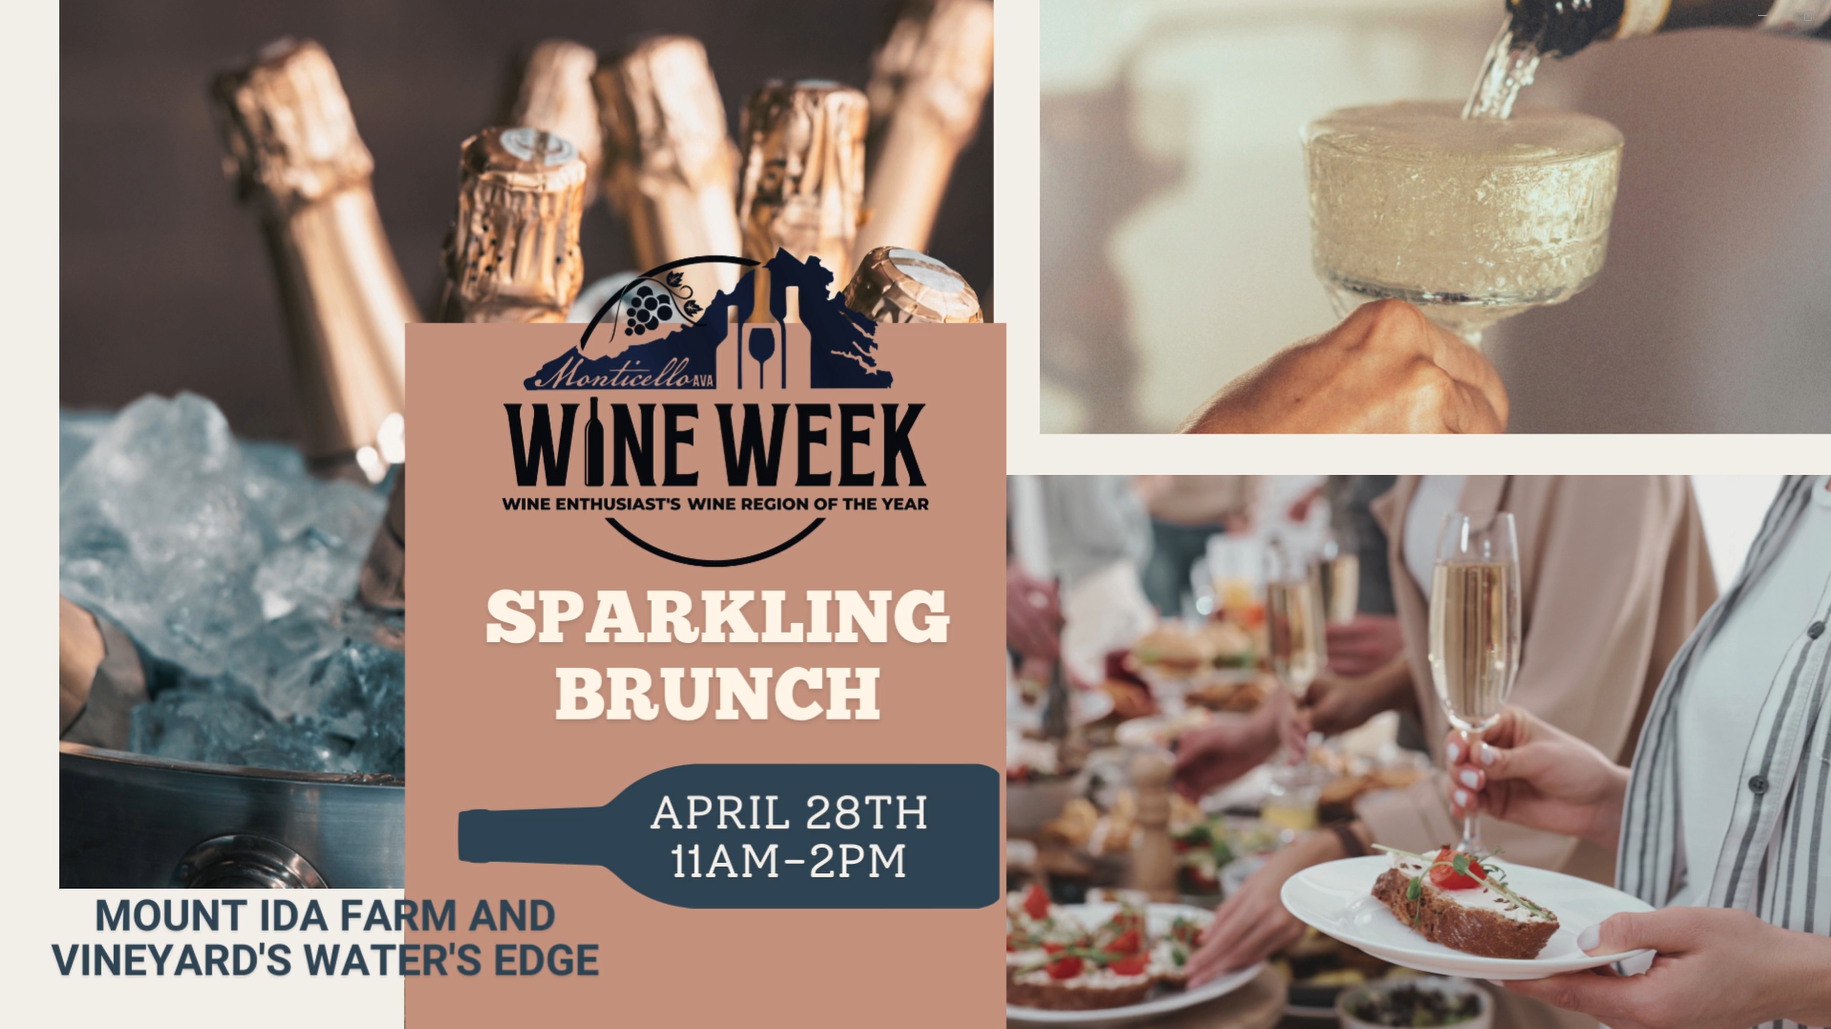 Monticello AVA Wine Week Sparkling Brunch graphic from Monticello Wine Trail